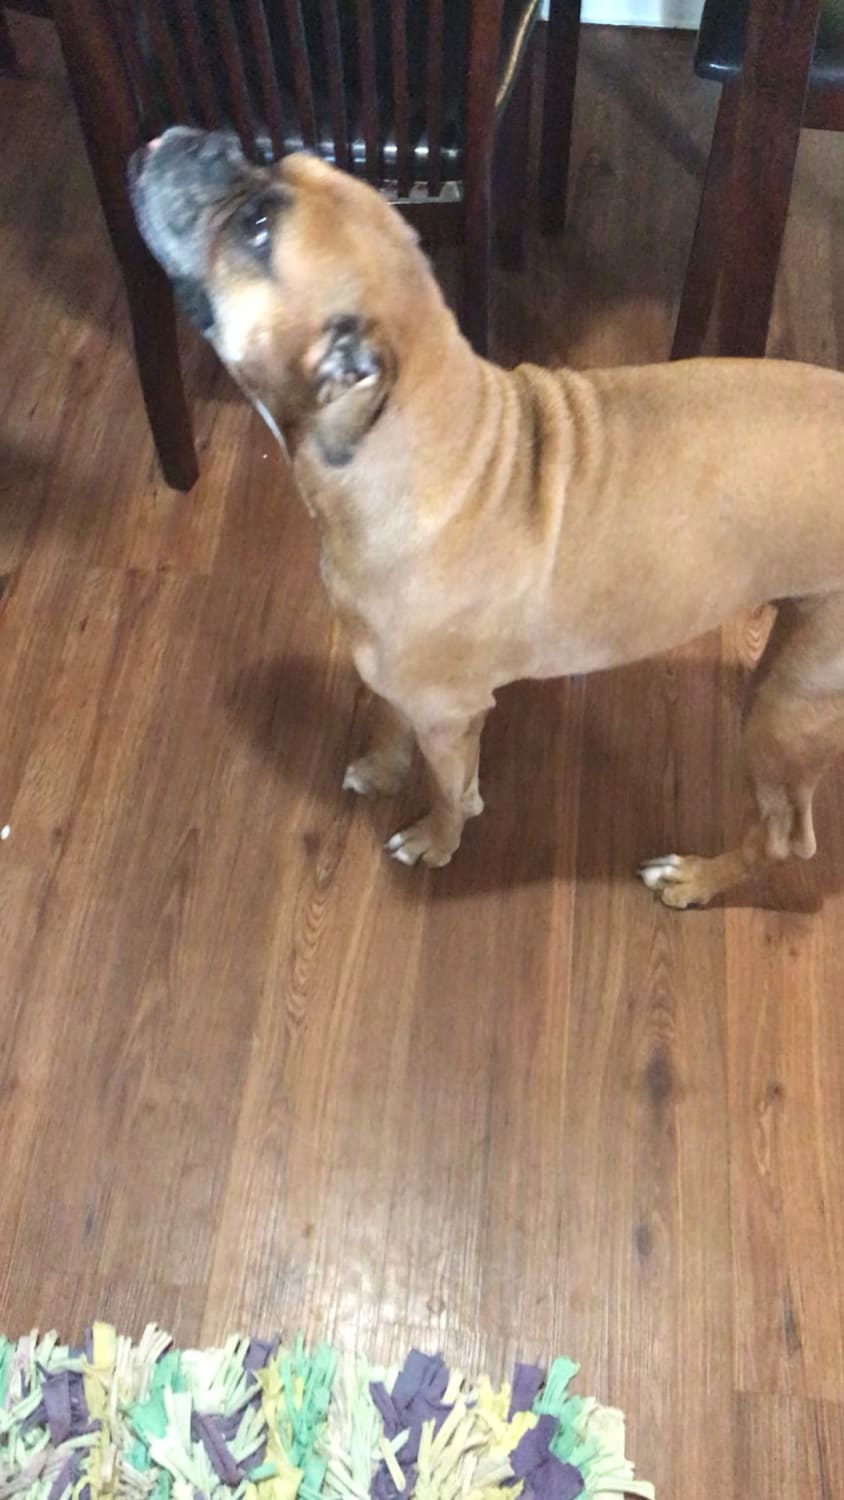 My 11 year old boxer does this every time we come home